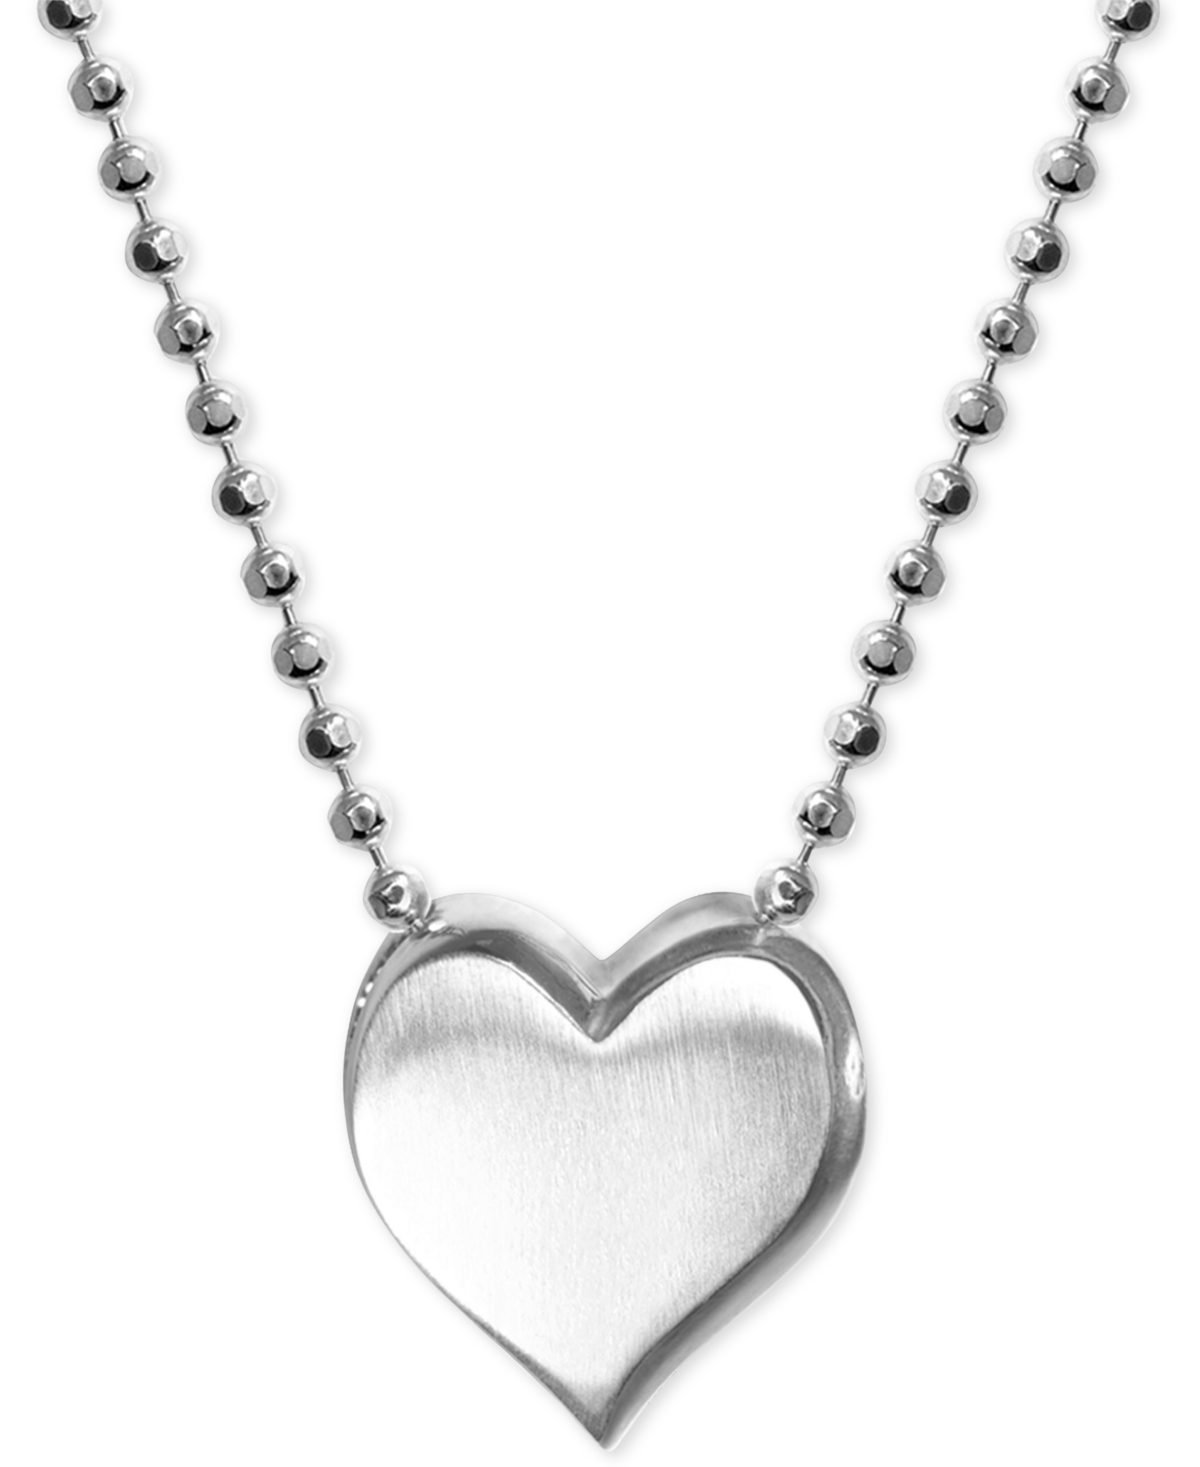 Heart Pendant Necklace in Sterling Silver - Silver